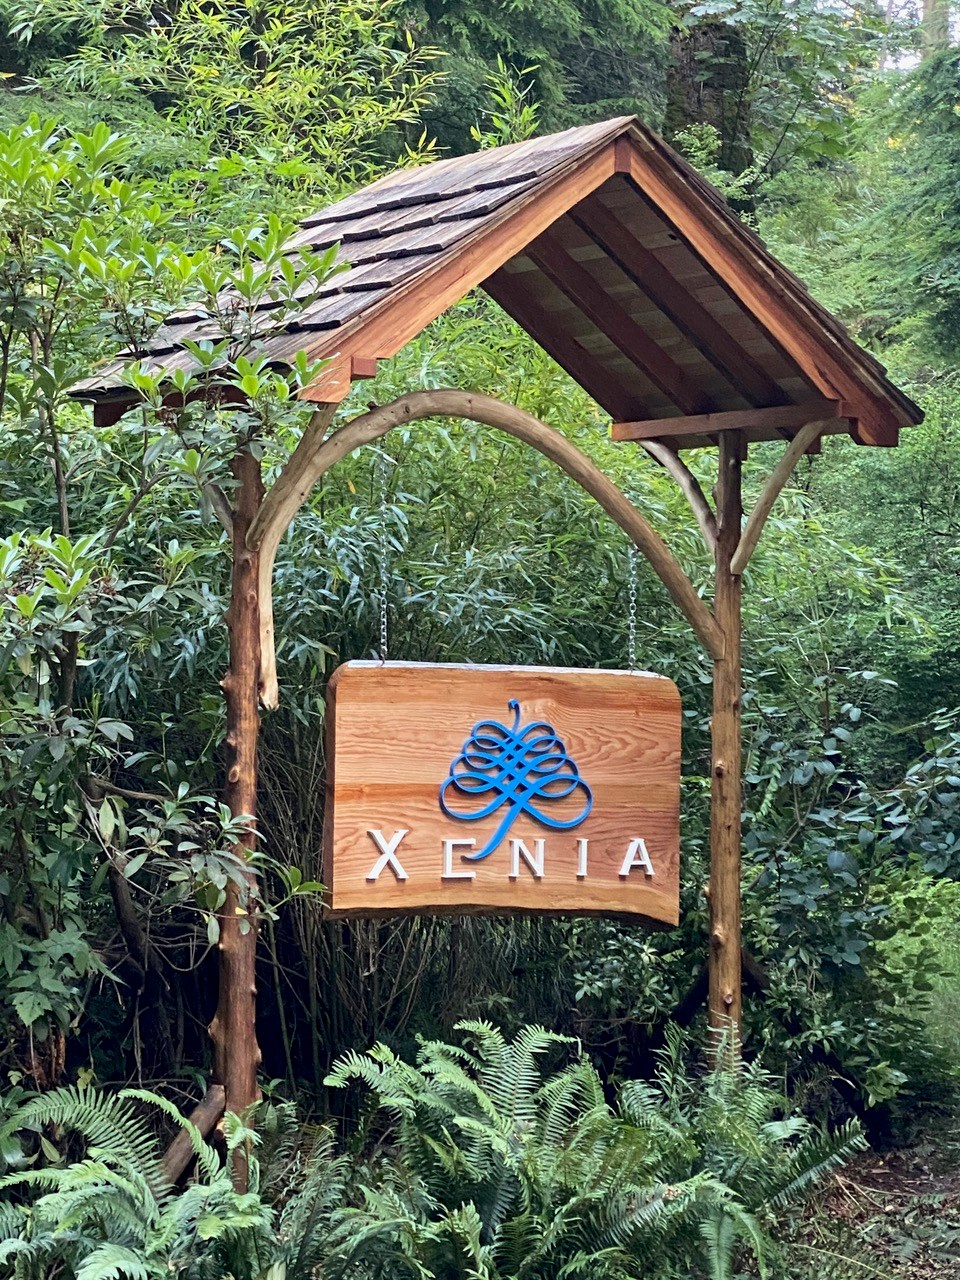 The Xenia sign